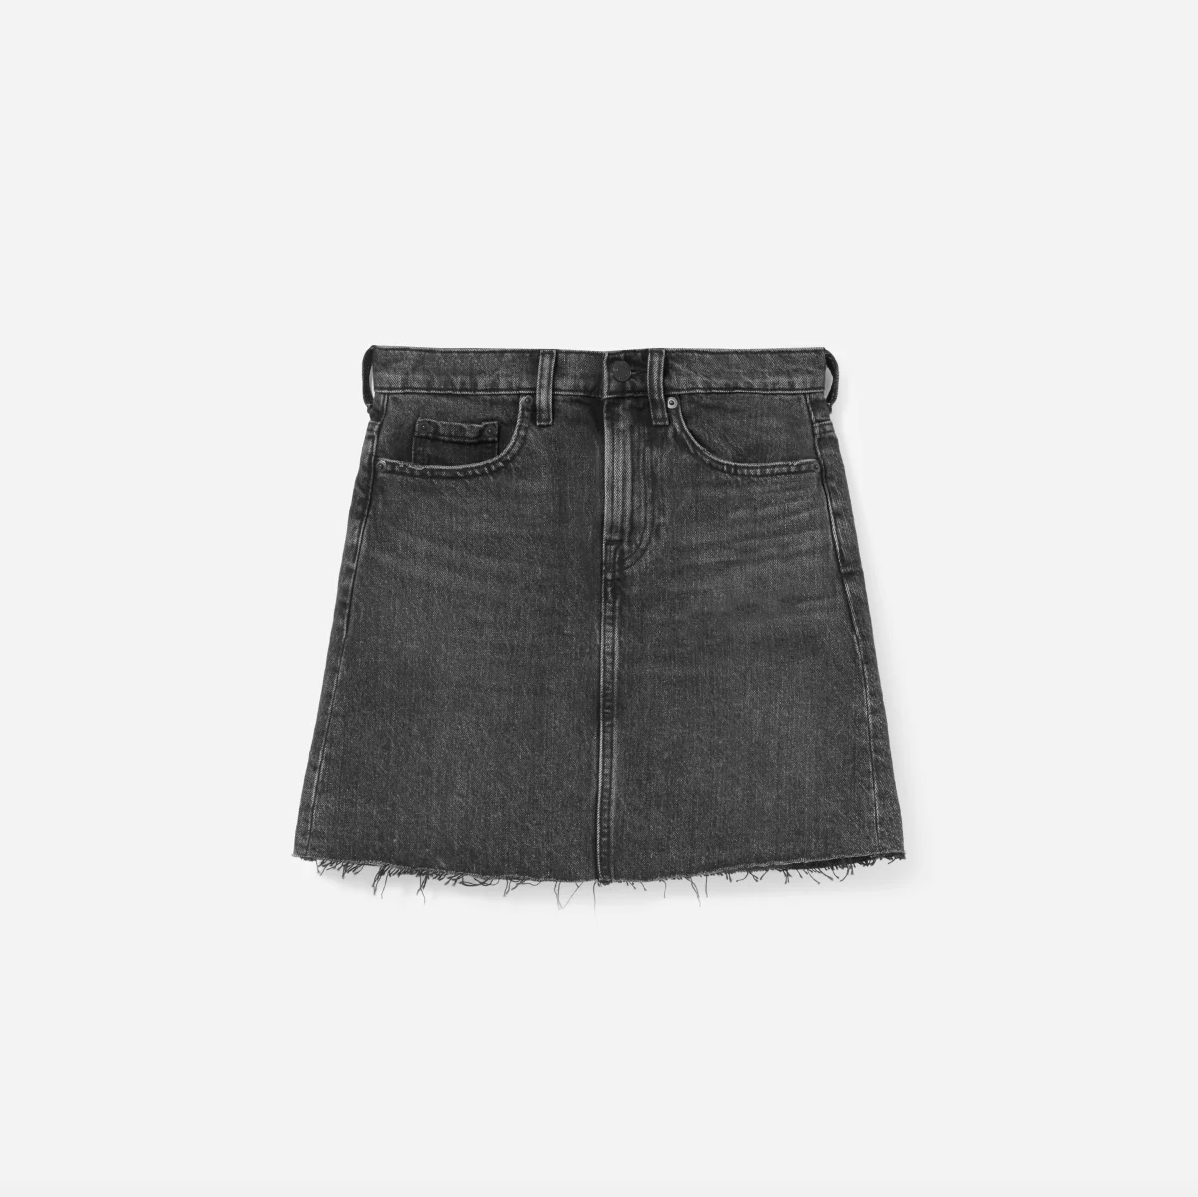 Everlane Launches Denim Shorts and a Skirt (Finally) - Everlane ...